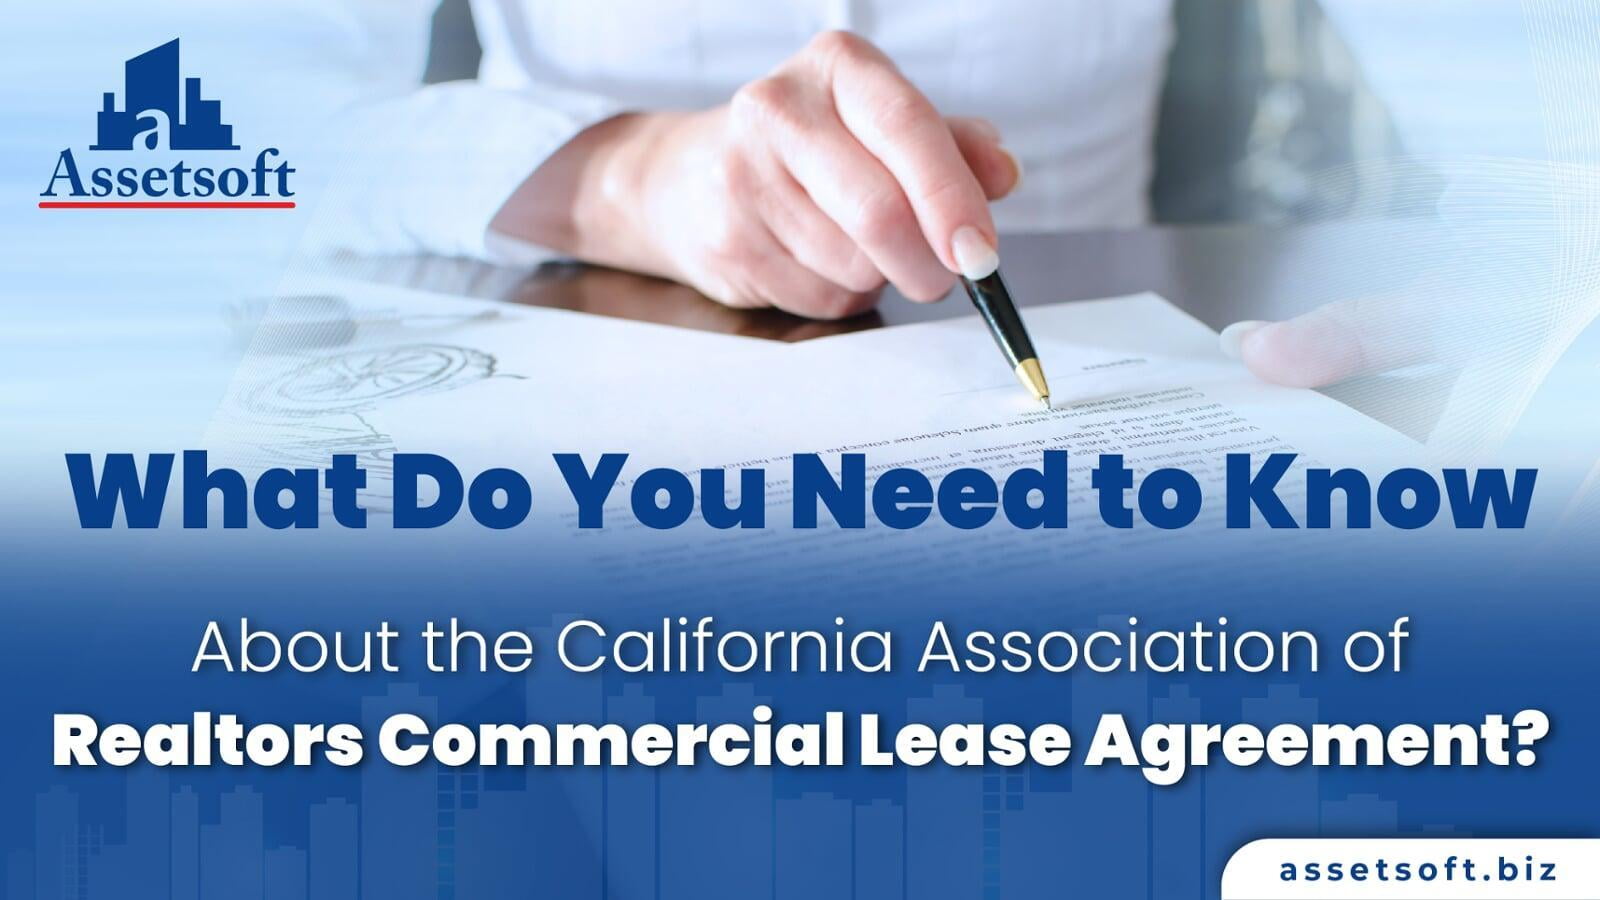 What Do You Need to Know About the California Association of Realtors Commercial Lease Agreement? 